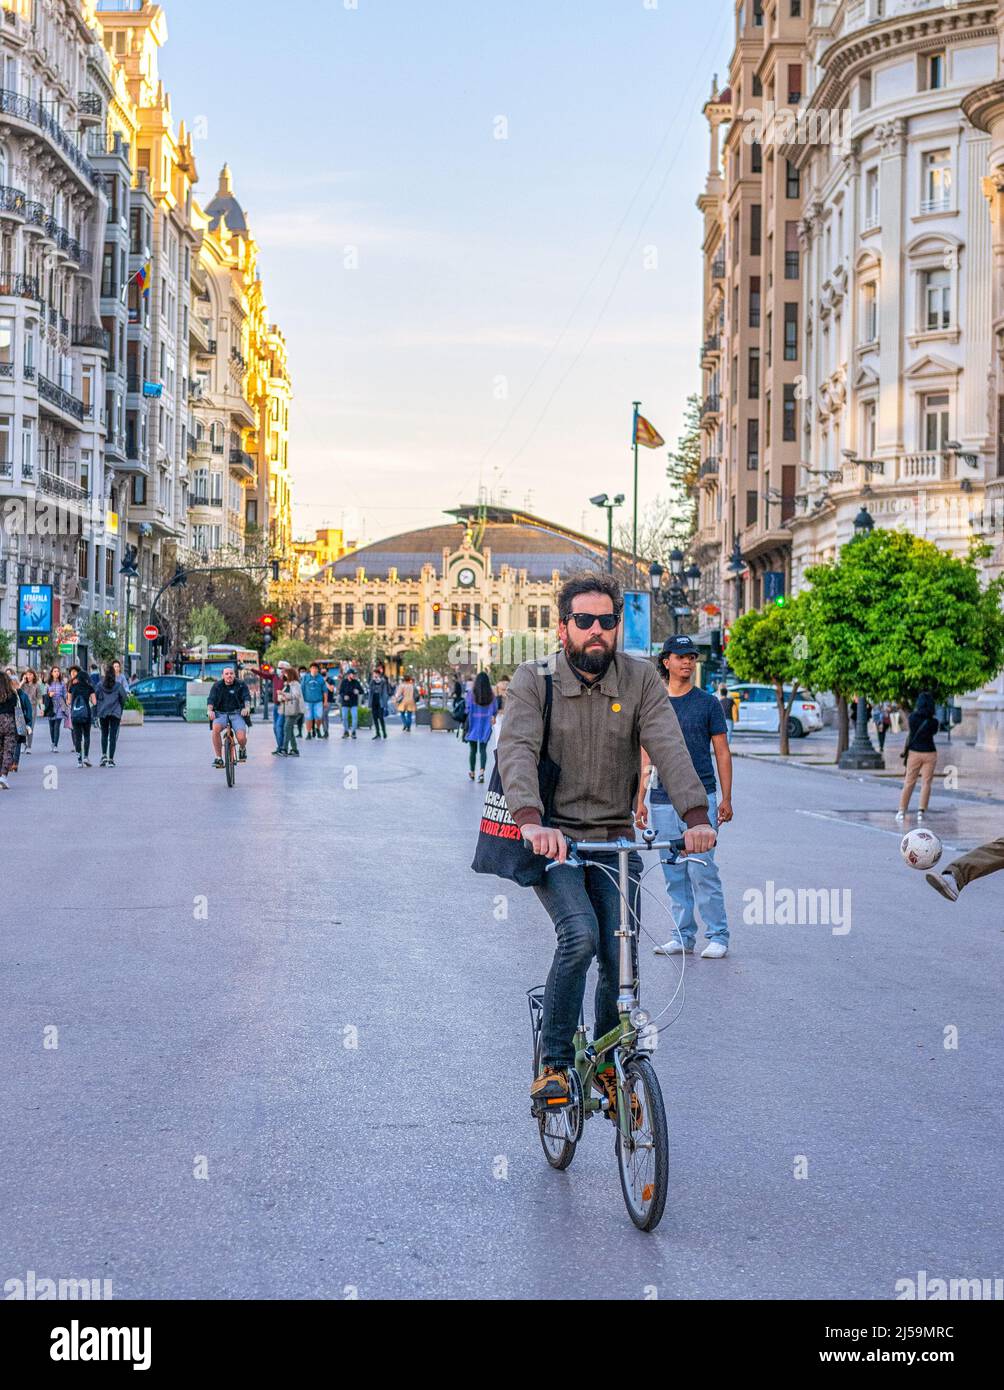 A man is seen riding a bicycle in the Plaza del Ayuntamiento or City Hall Plaza. The town square is surrounded by majestic colonial style buildings. O Stock Photo